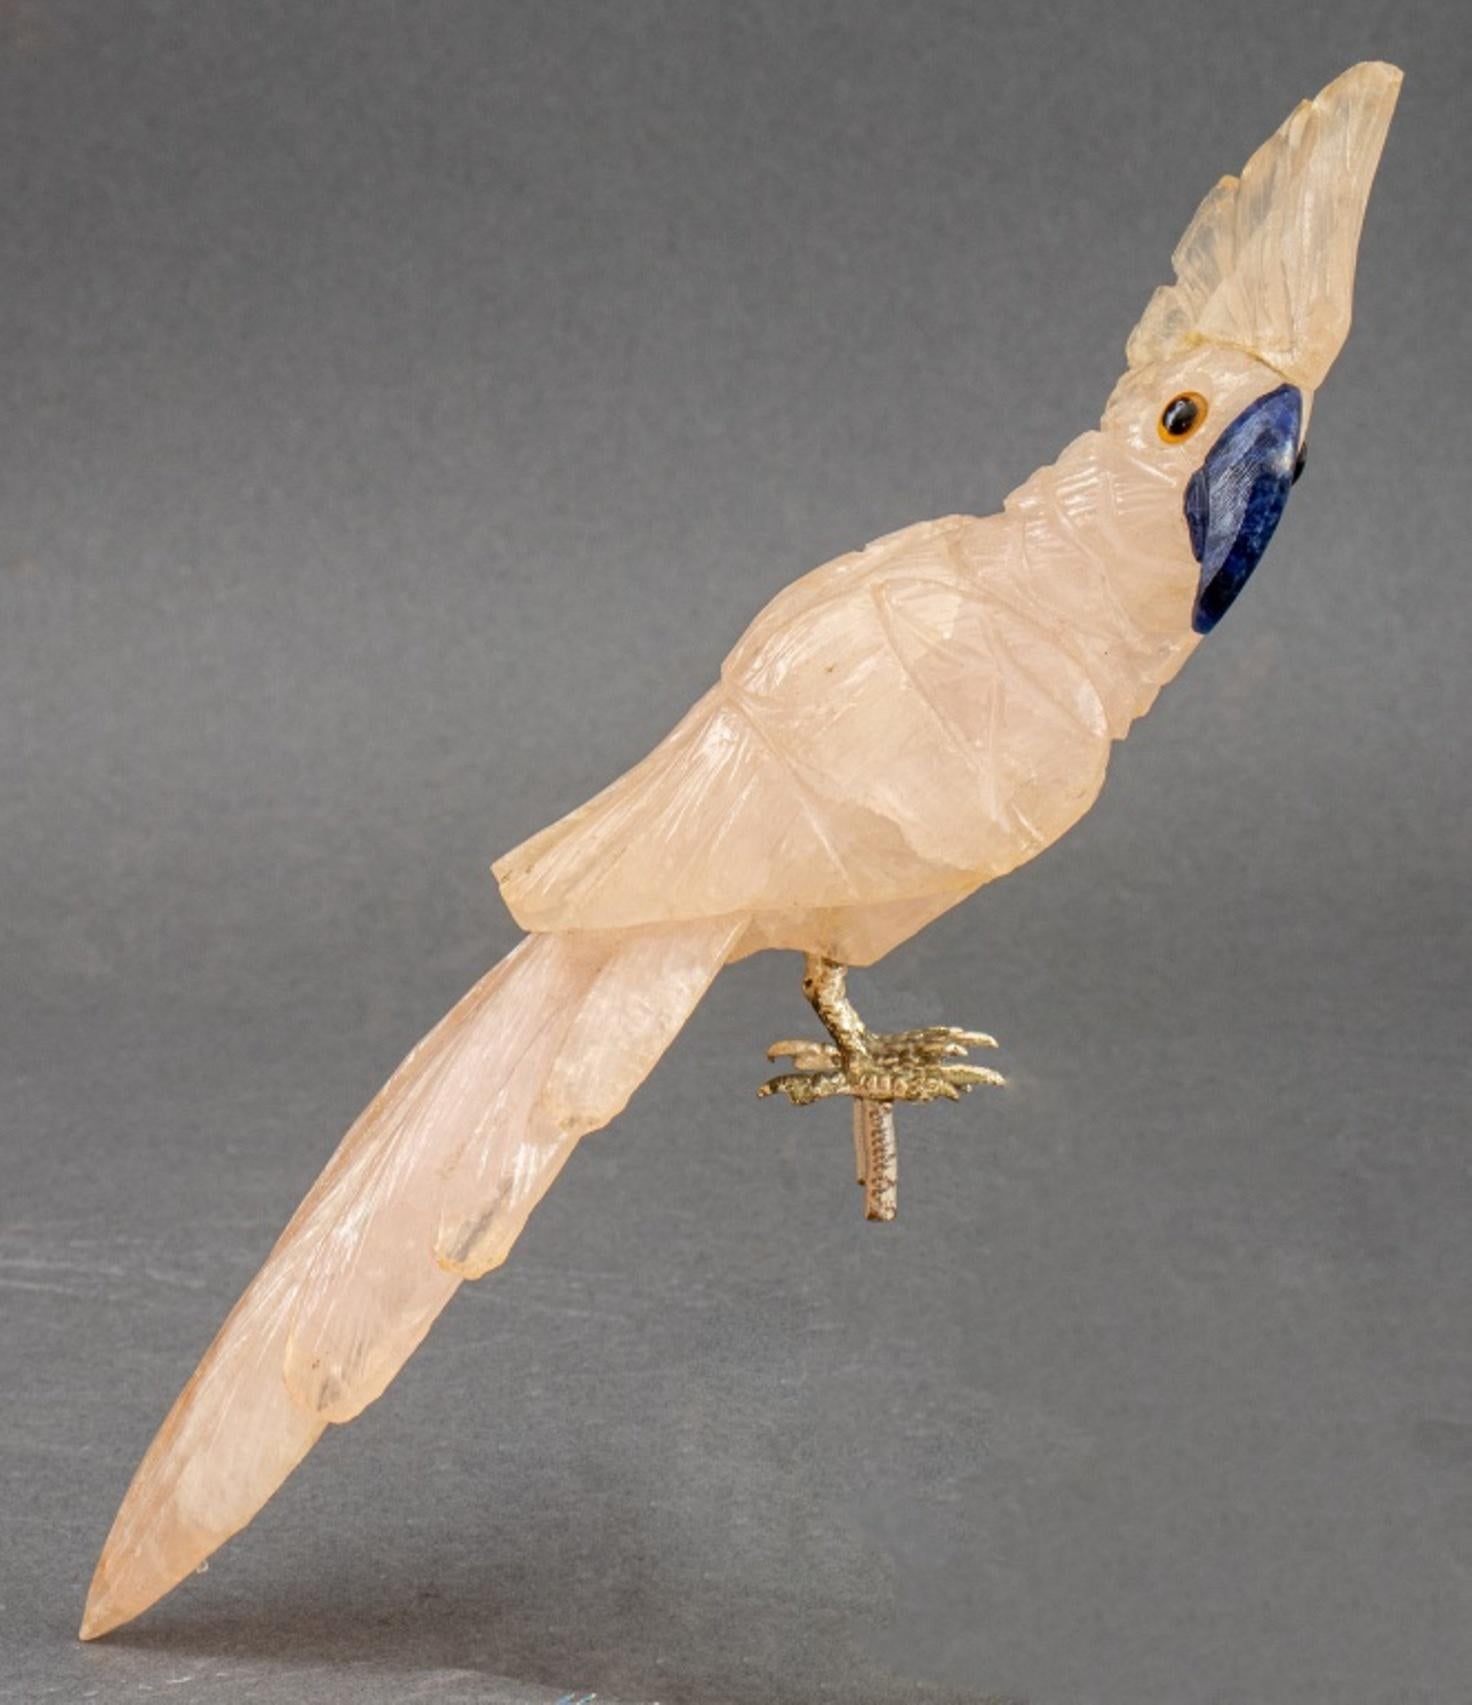 Italian hardstone cockatoo figure, in the Faberge style in quartz with lapis beak and silver mounted feet, formerly on a perch or rock (lacking).

Dimensions:   7.5